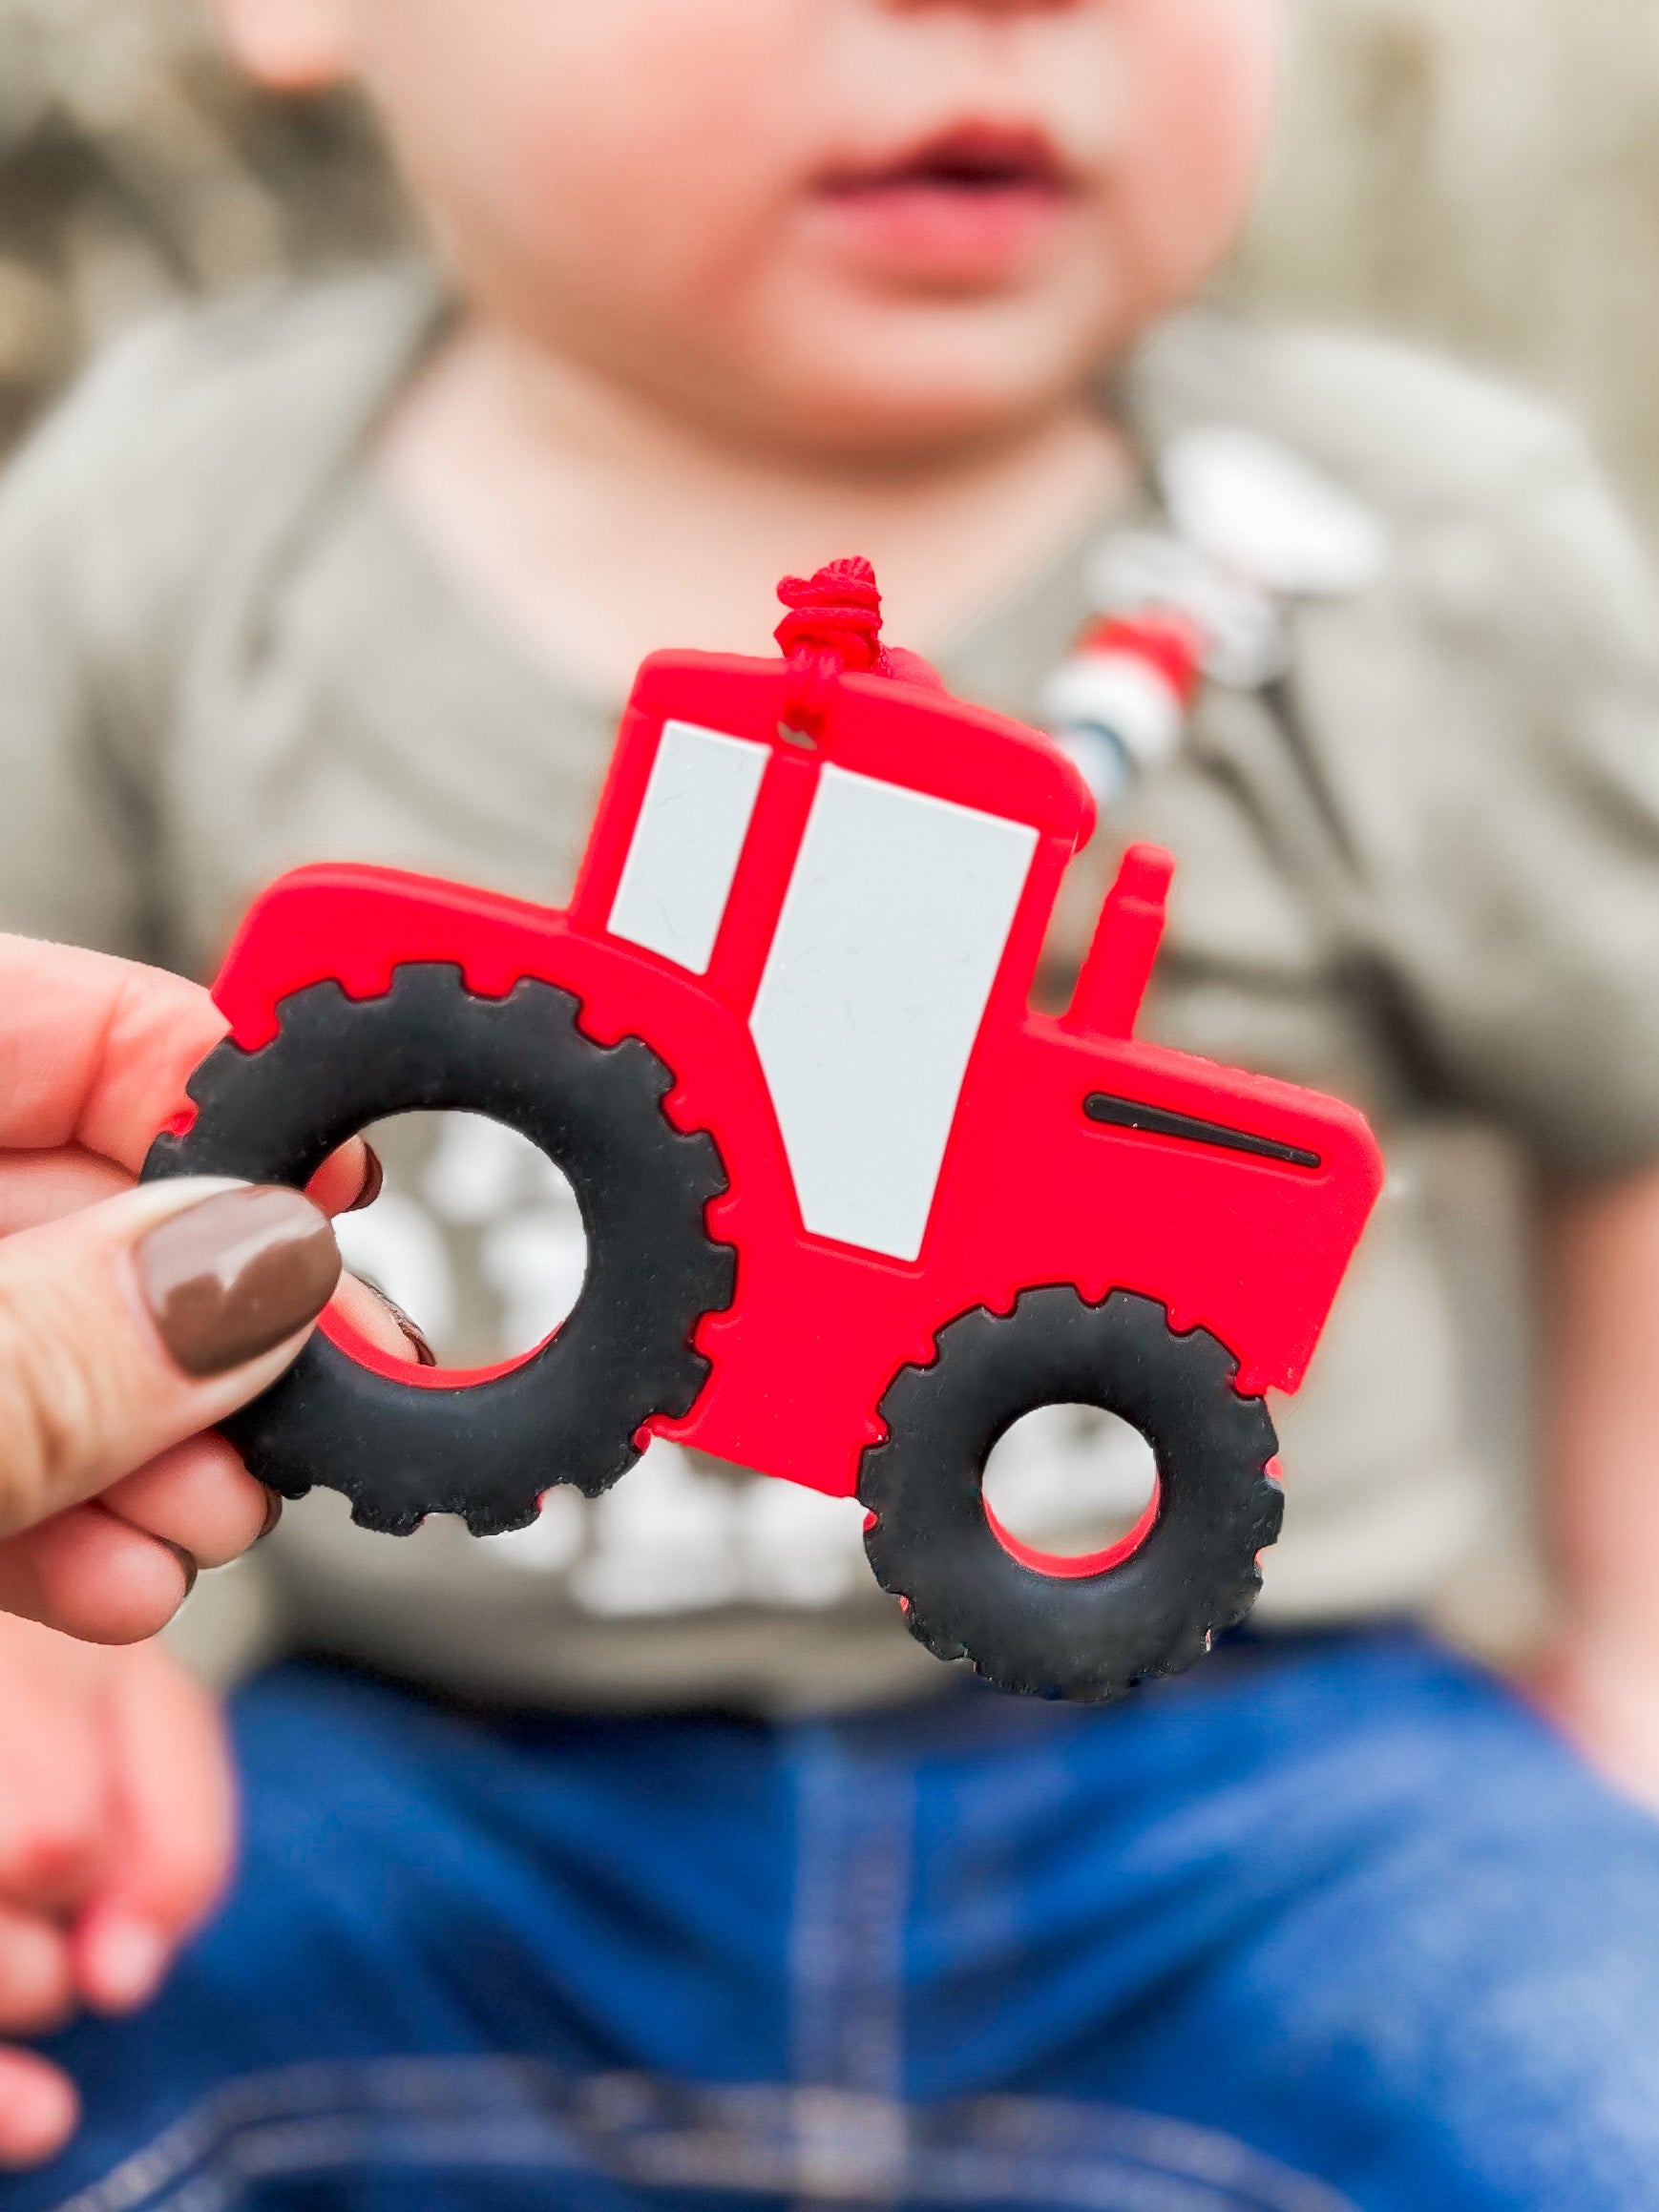 Red Tractor Teether